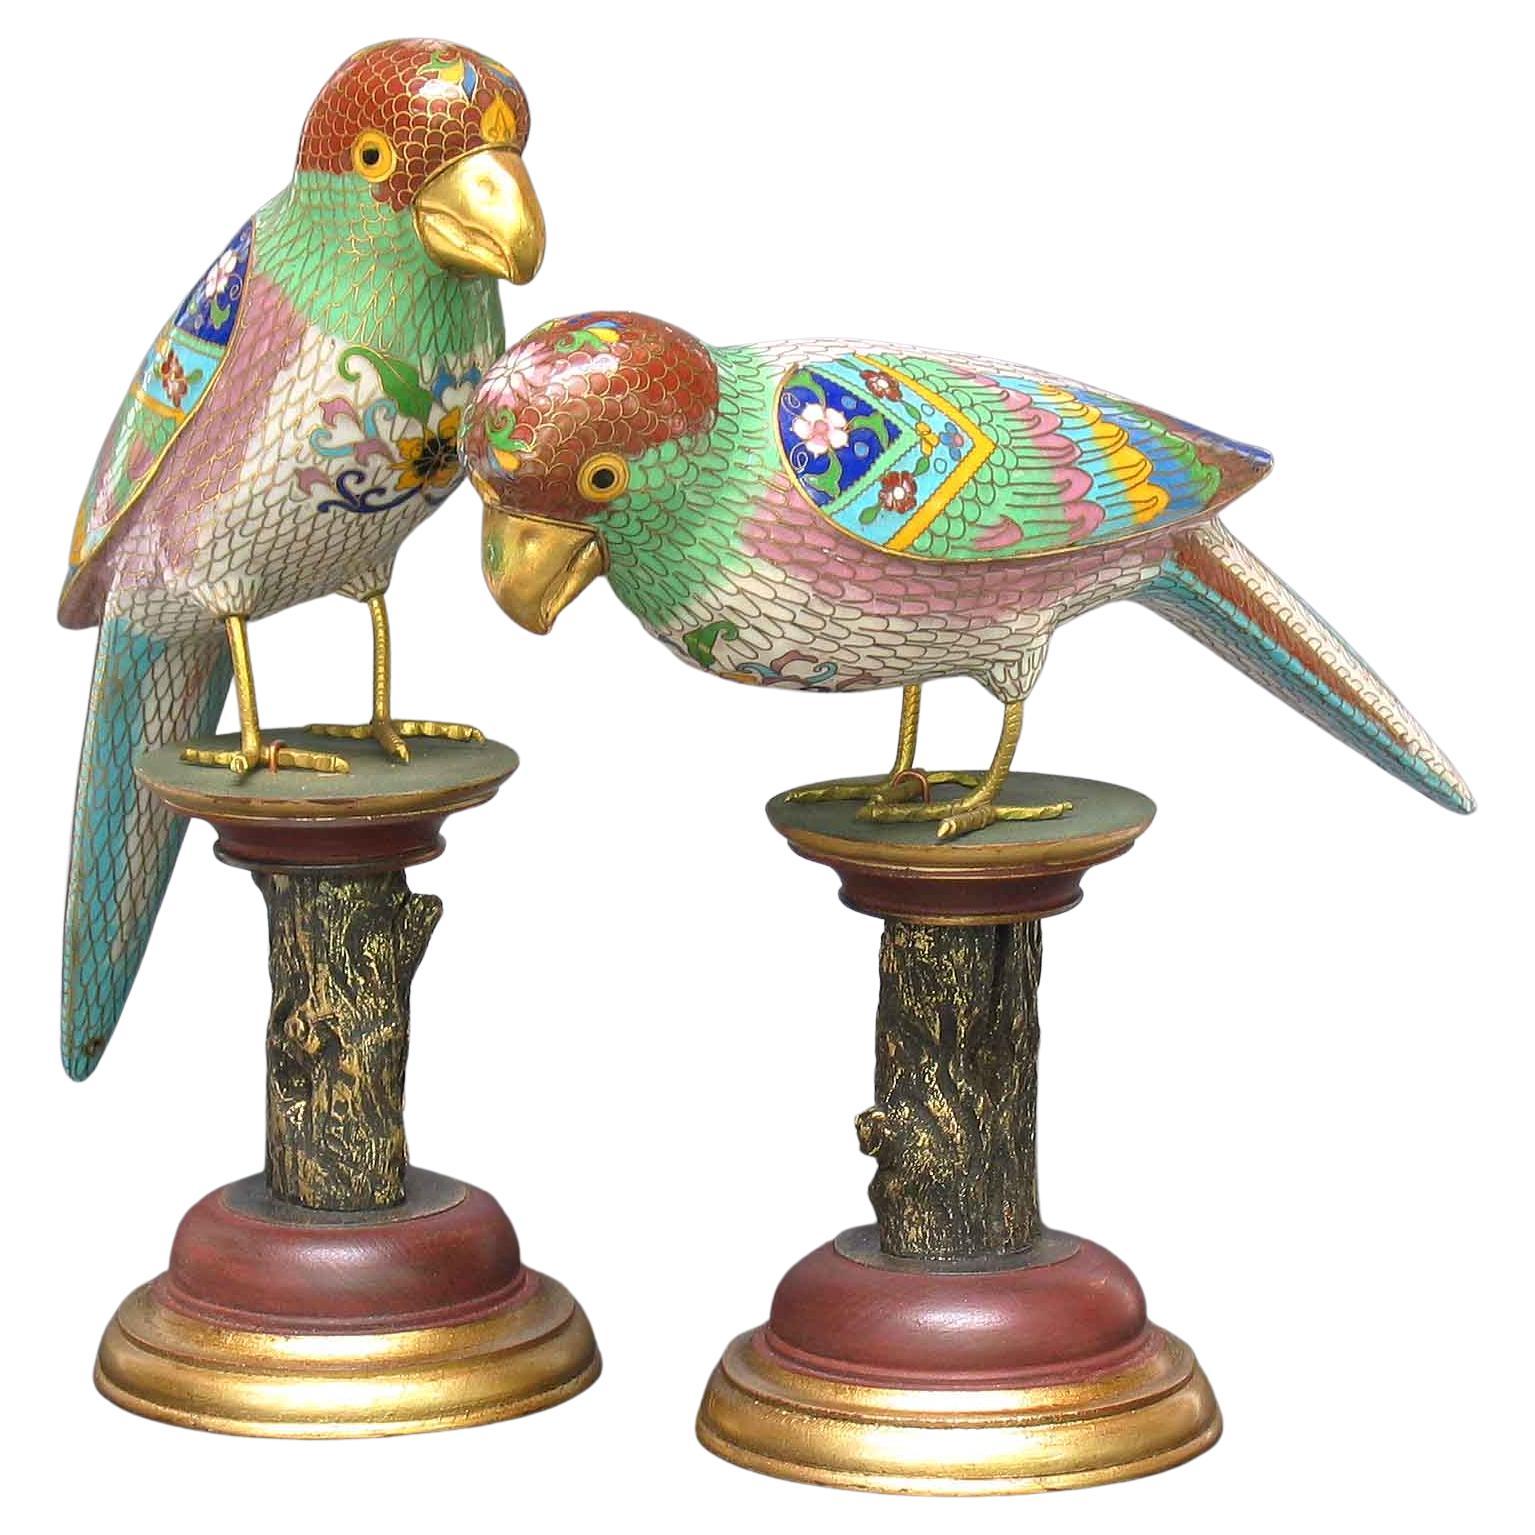 Pair of Chinese Cloisonne Enamel Parrots on Stands 1st half of 20th Century